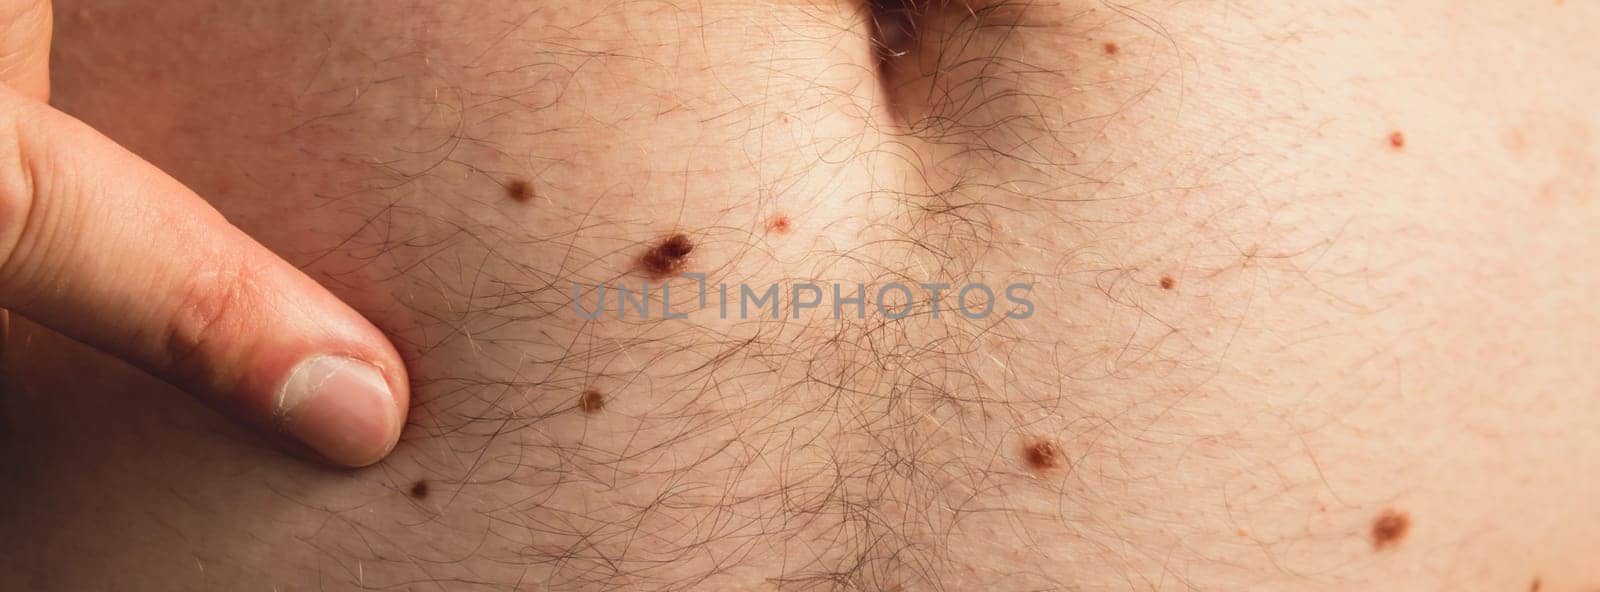 Unrecognizable man showing his birthmarks on skin Close up detail of the bare skin Sun Exposure effect on skin. Health Effects of UV Radiation Male with birthmarks Pigmentation and lot of birthmarks